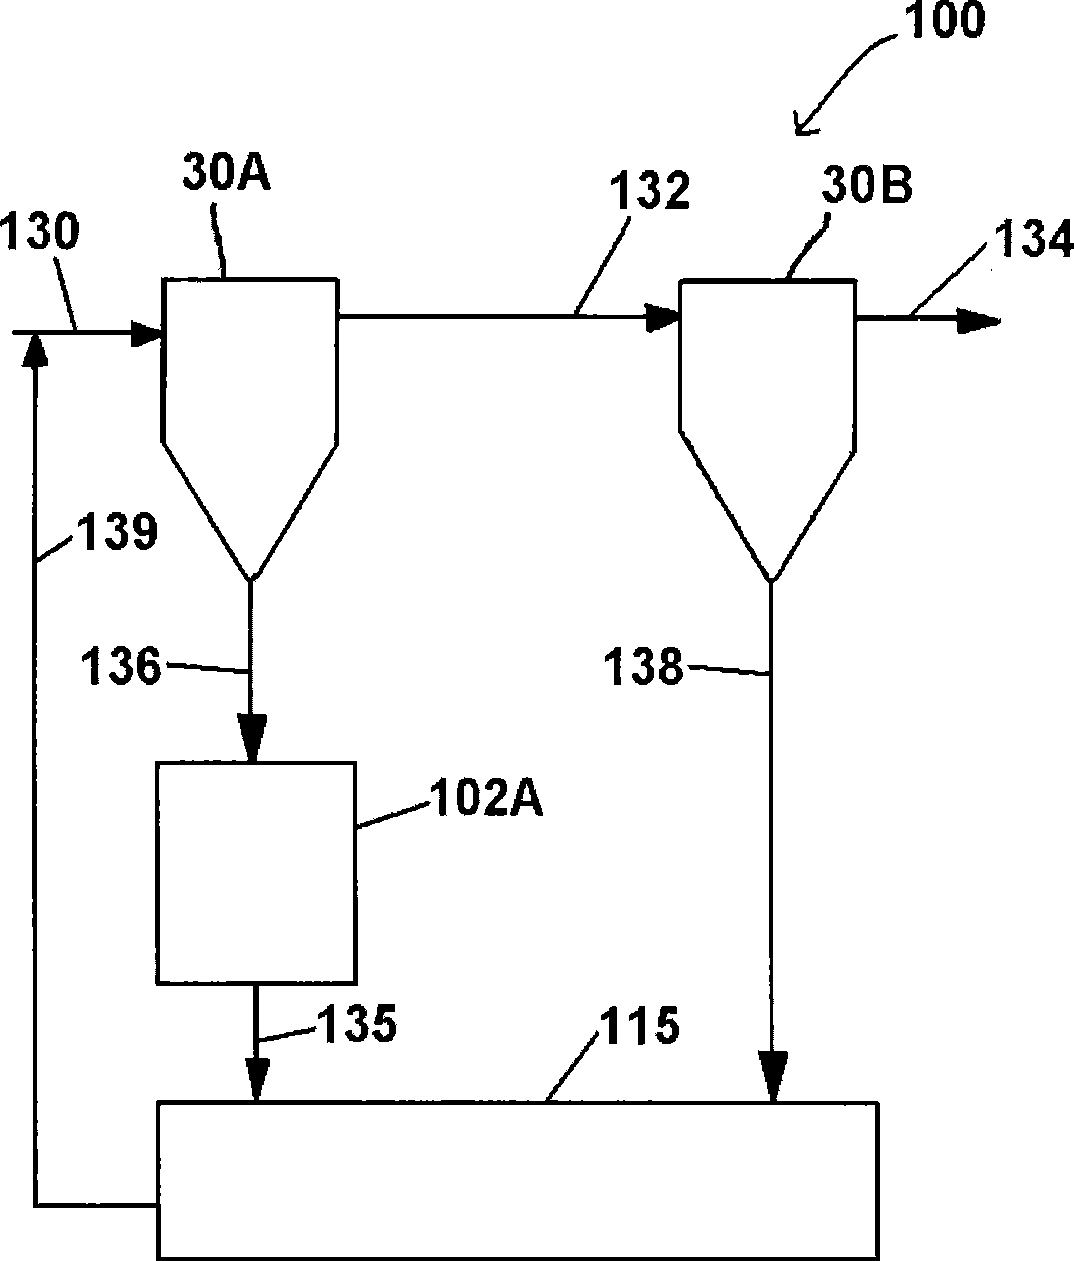 Method and apparatus for removing impurities in rejects from sequential filters using separate treatment units